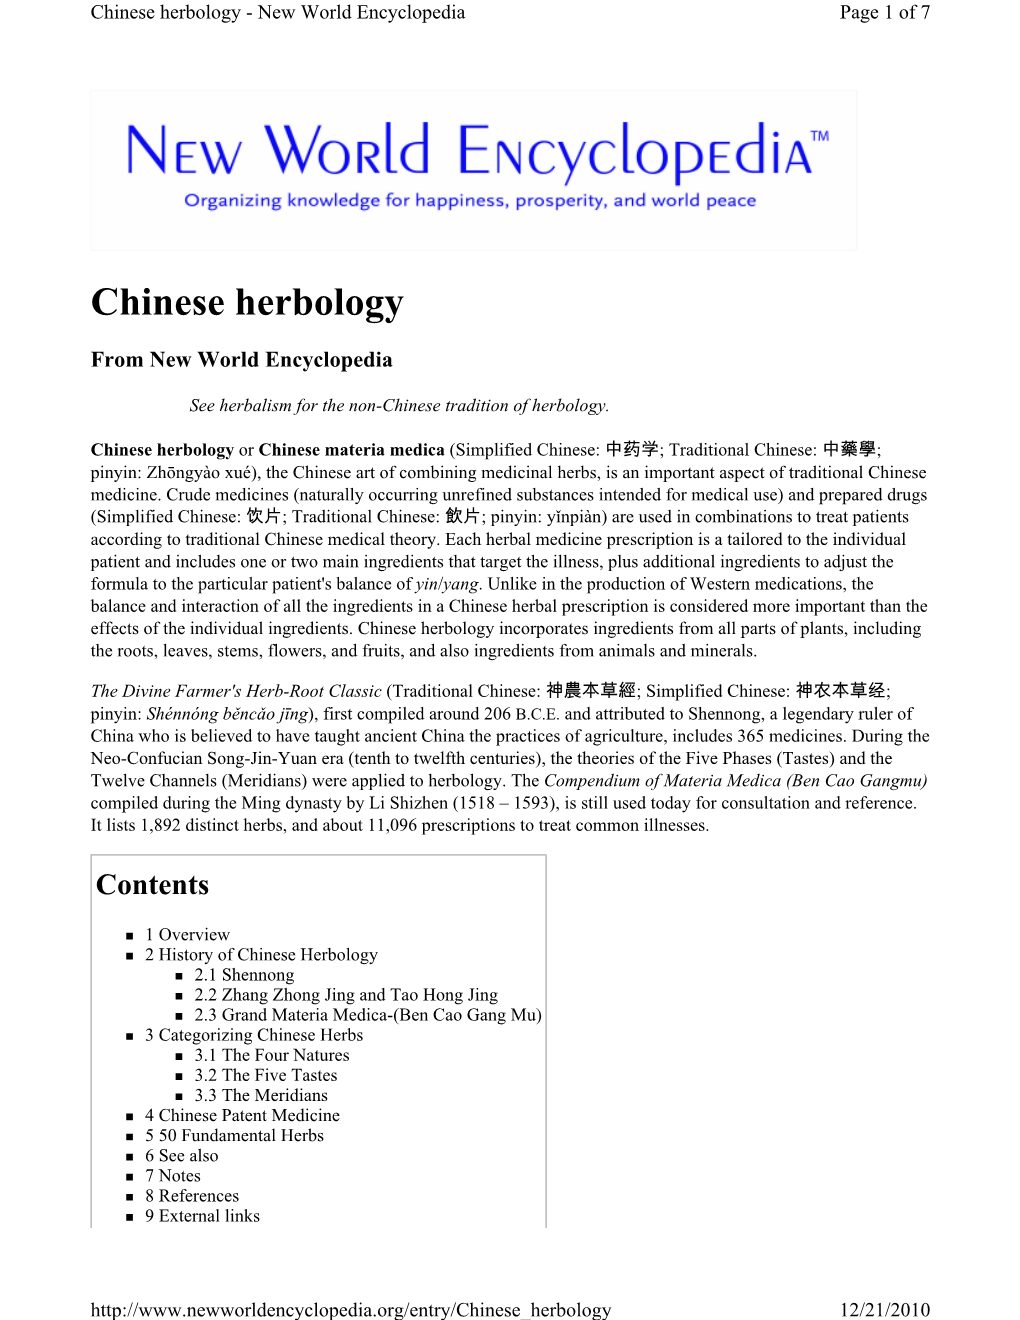 Chinese Herbology - New World Encyclopedia Page 1 of 7